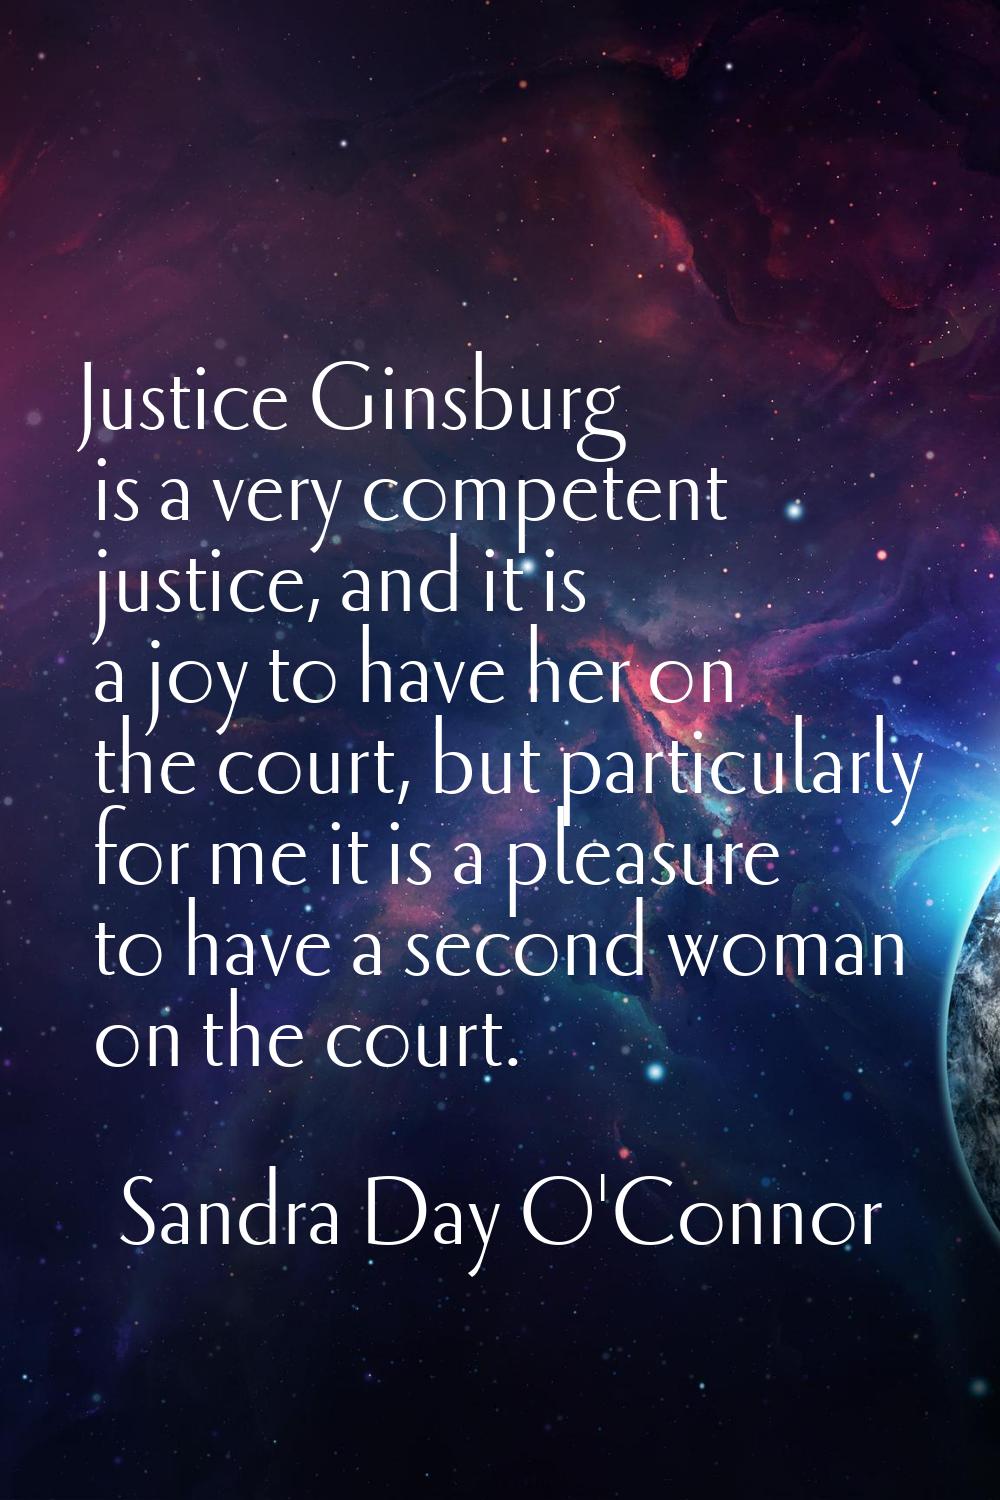 Justice Ginsburg is a very competent justice, and it is a joy to have her on the court, but particu